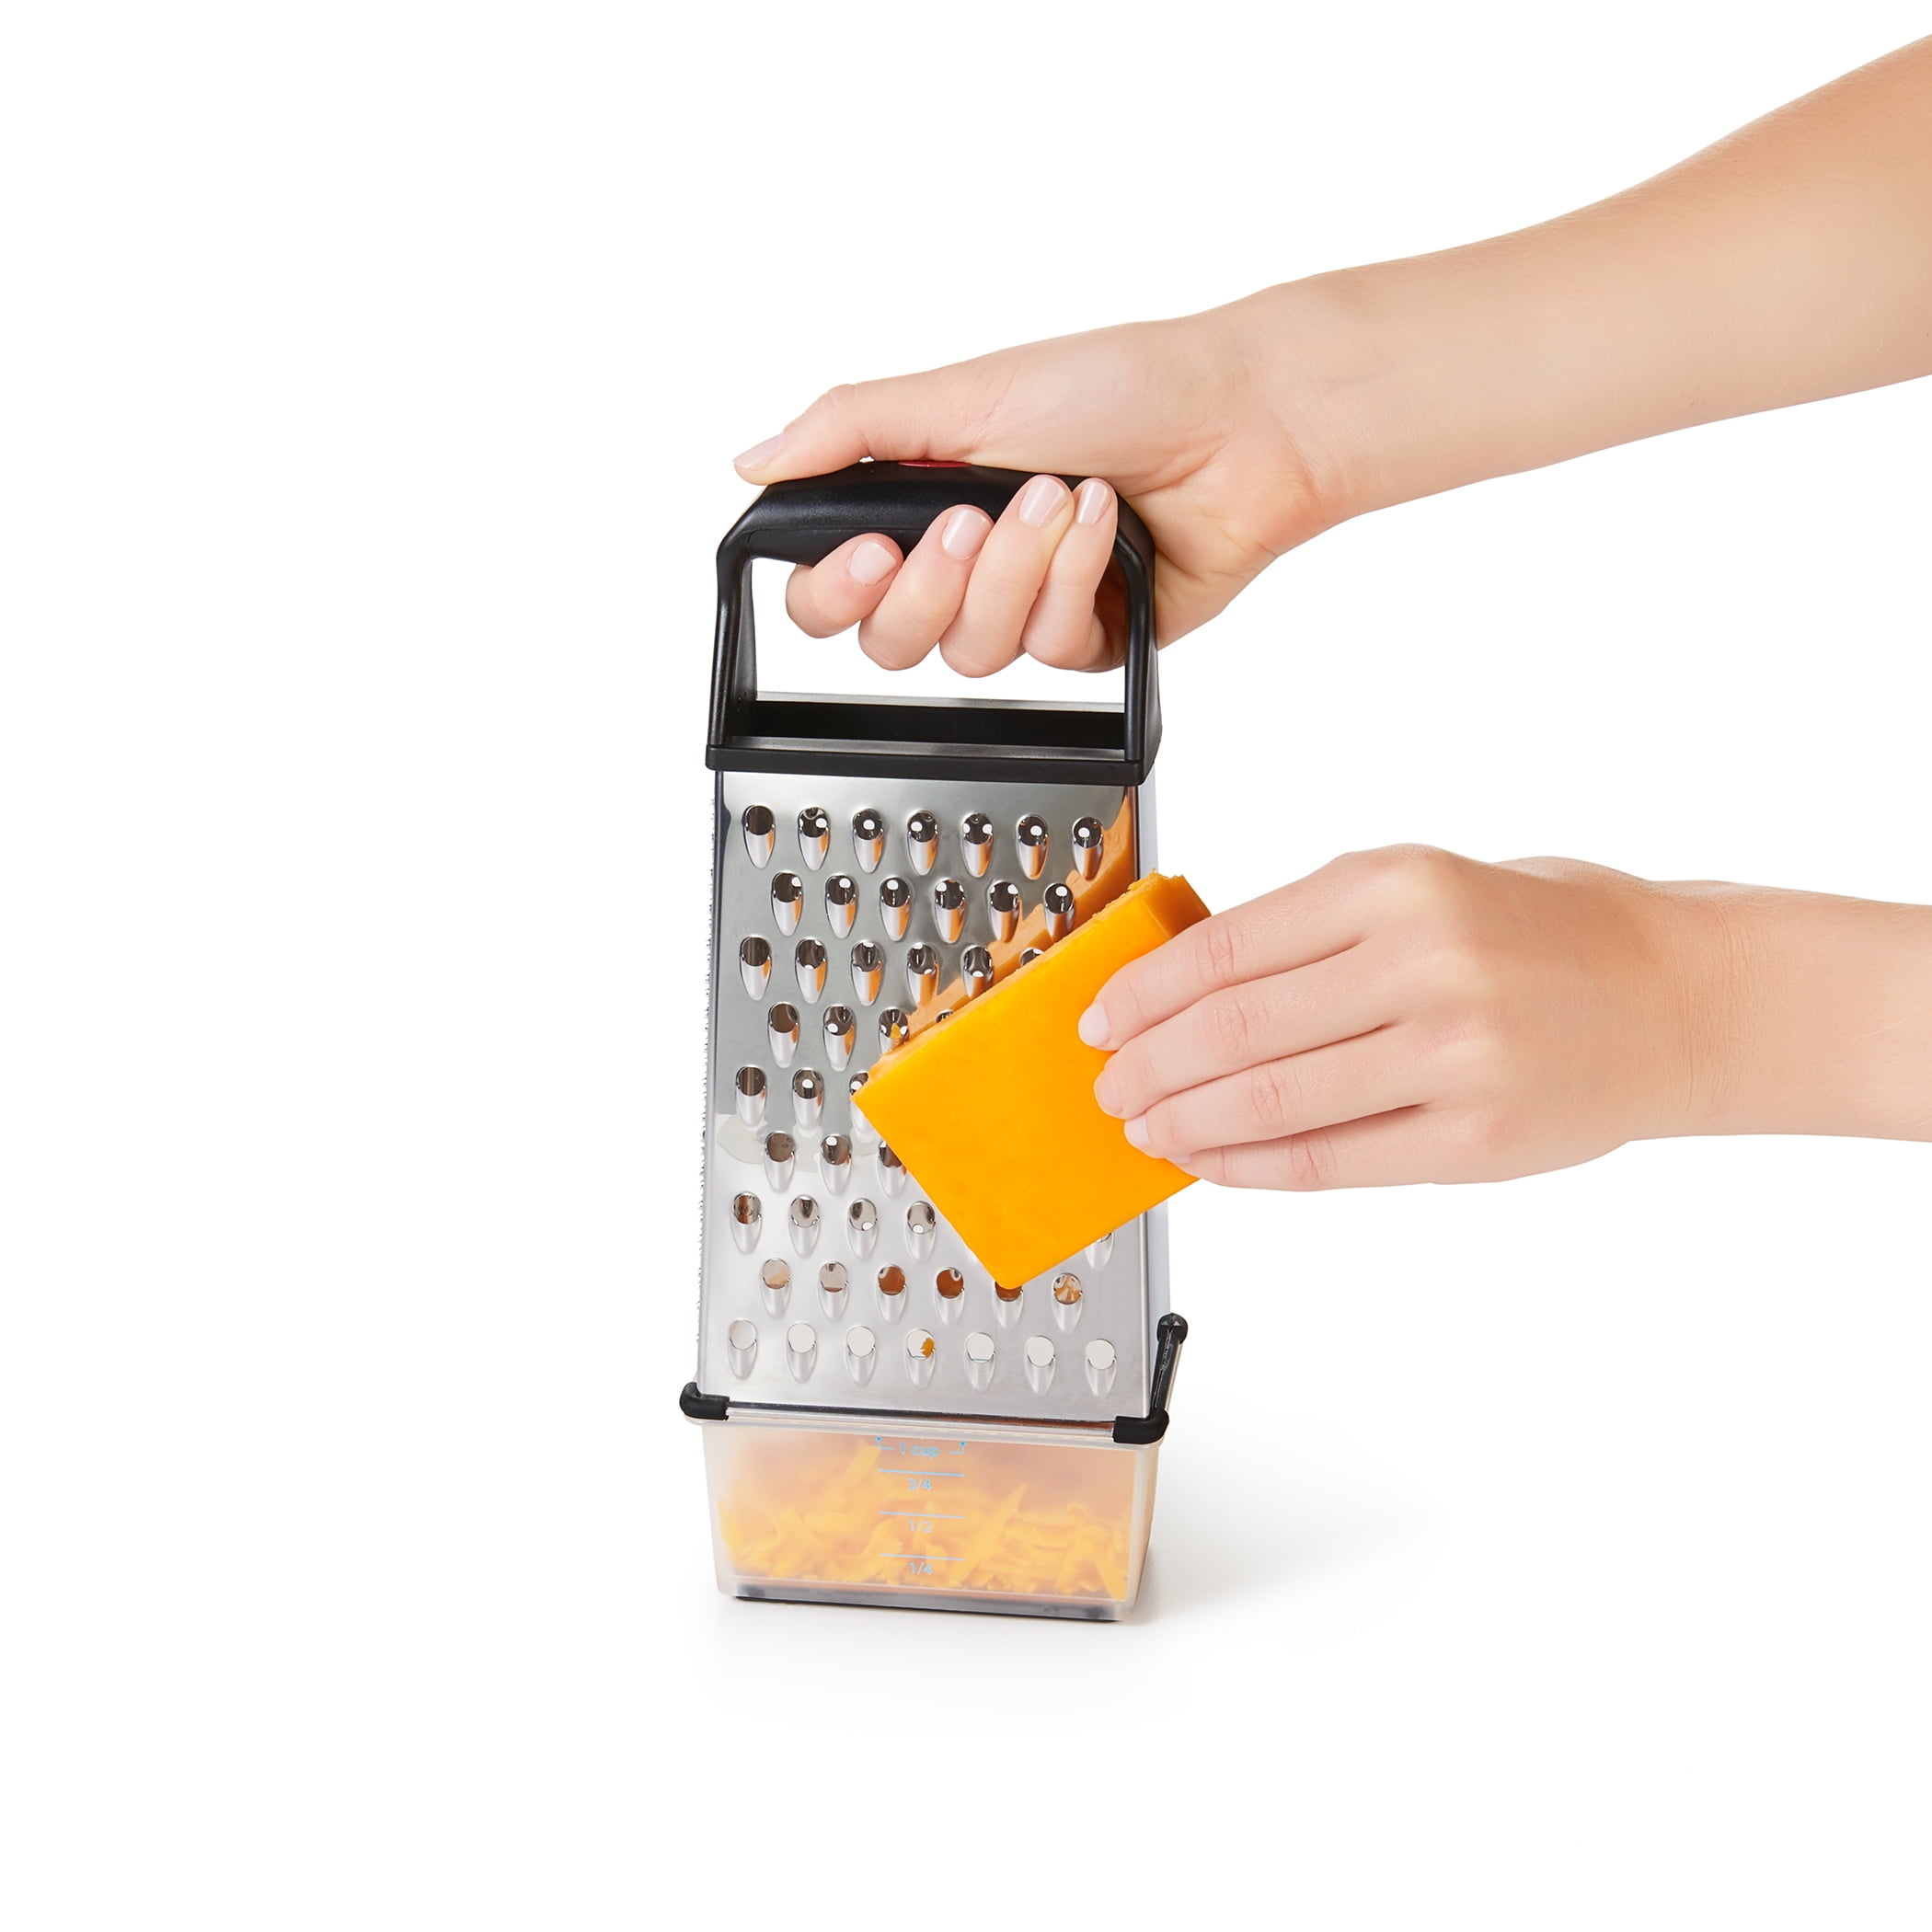 OXO SoftWorks™ Stainless Steel Box Grater - Silver, 1 ct - Fry's Food Stores